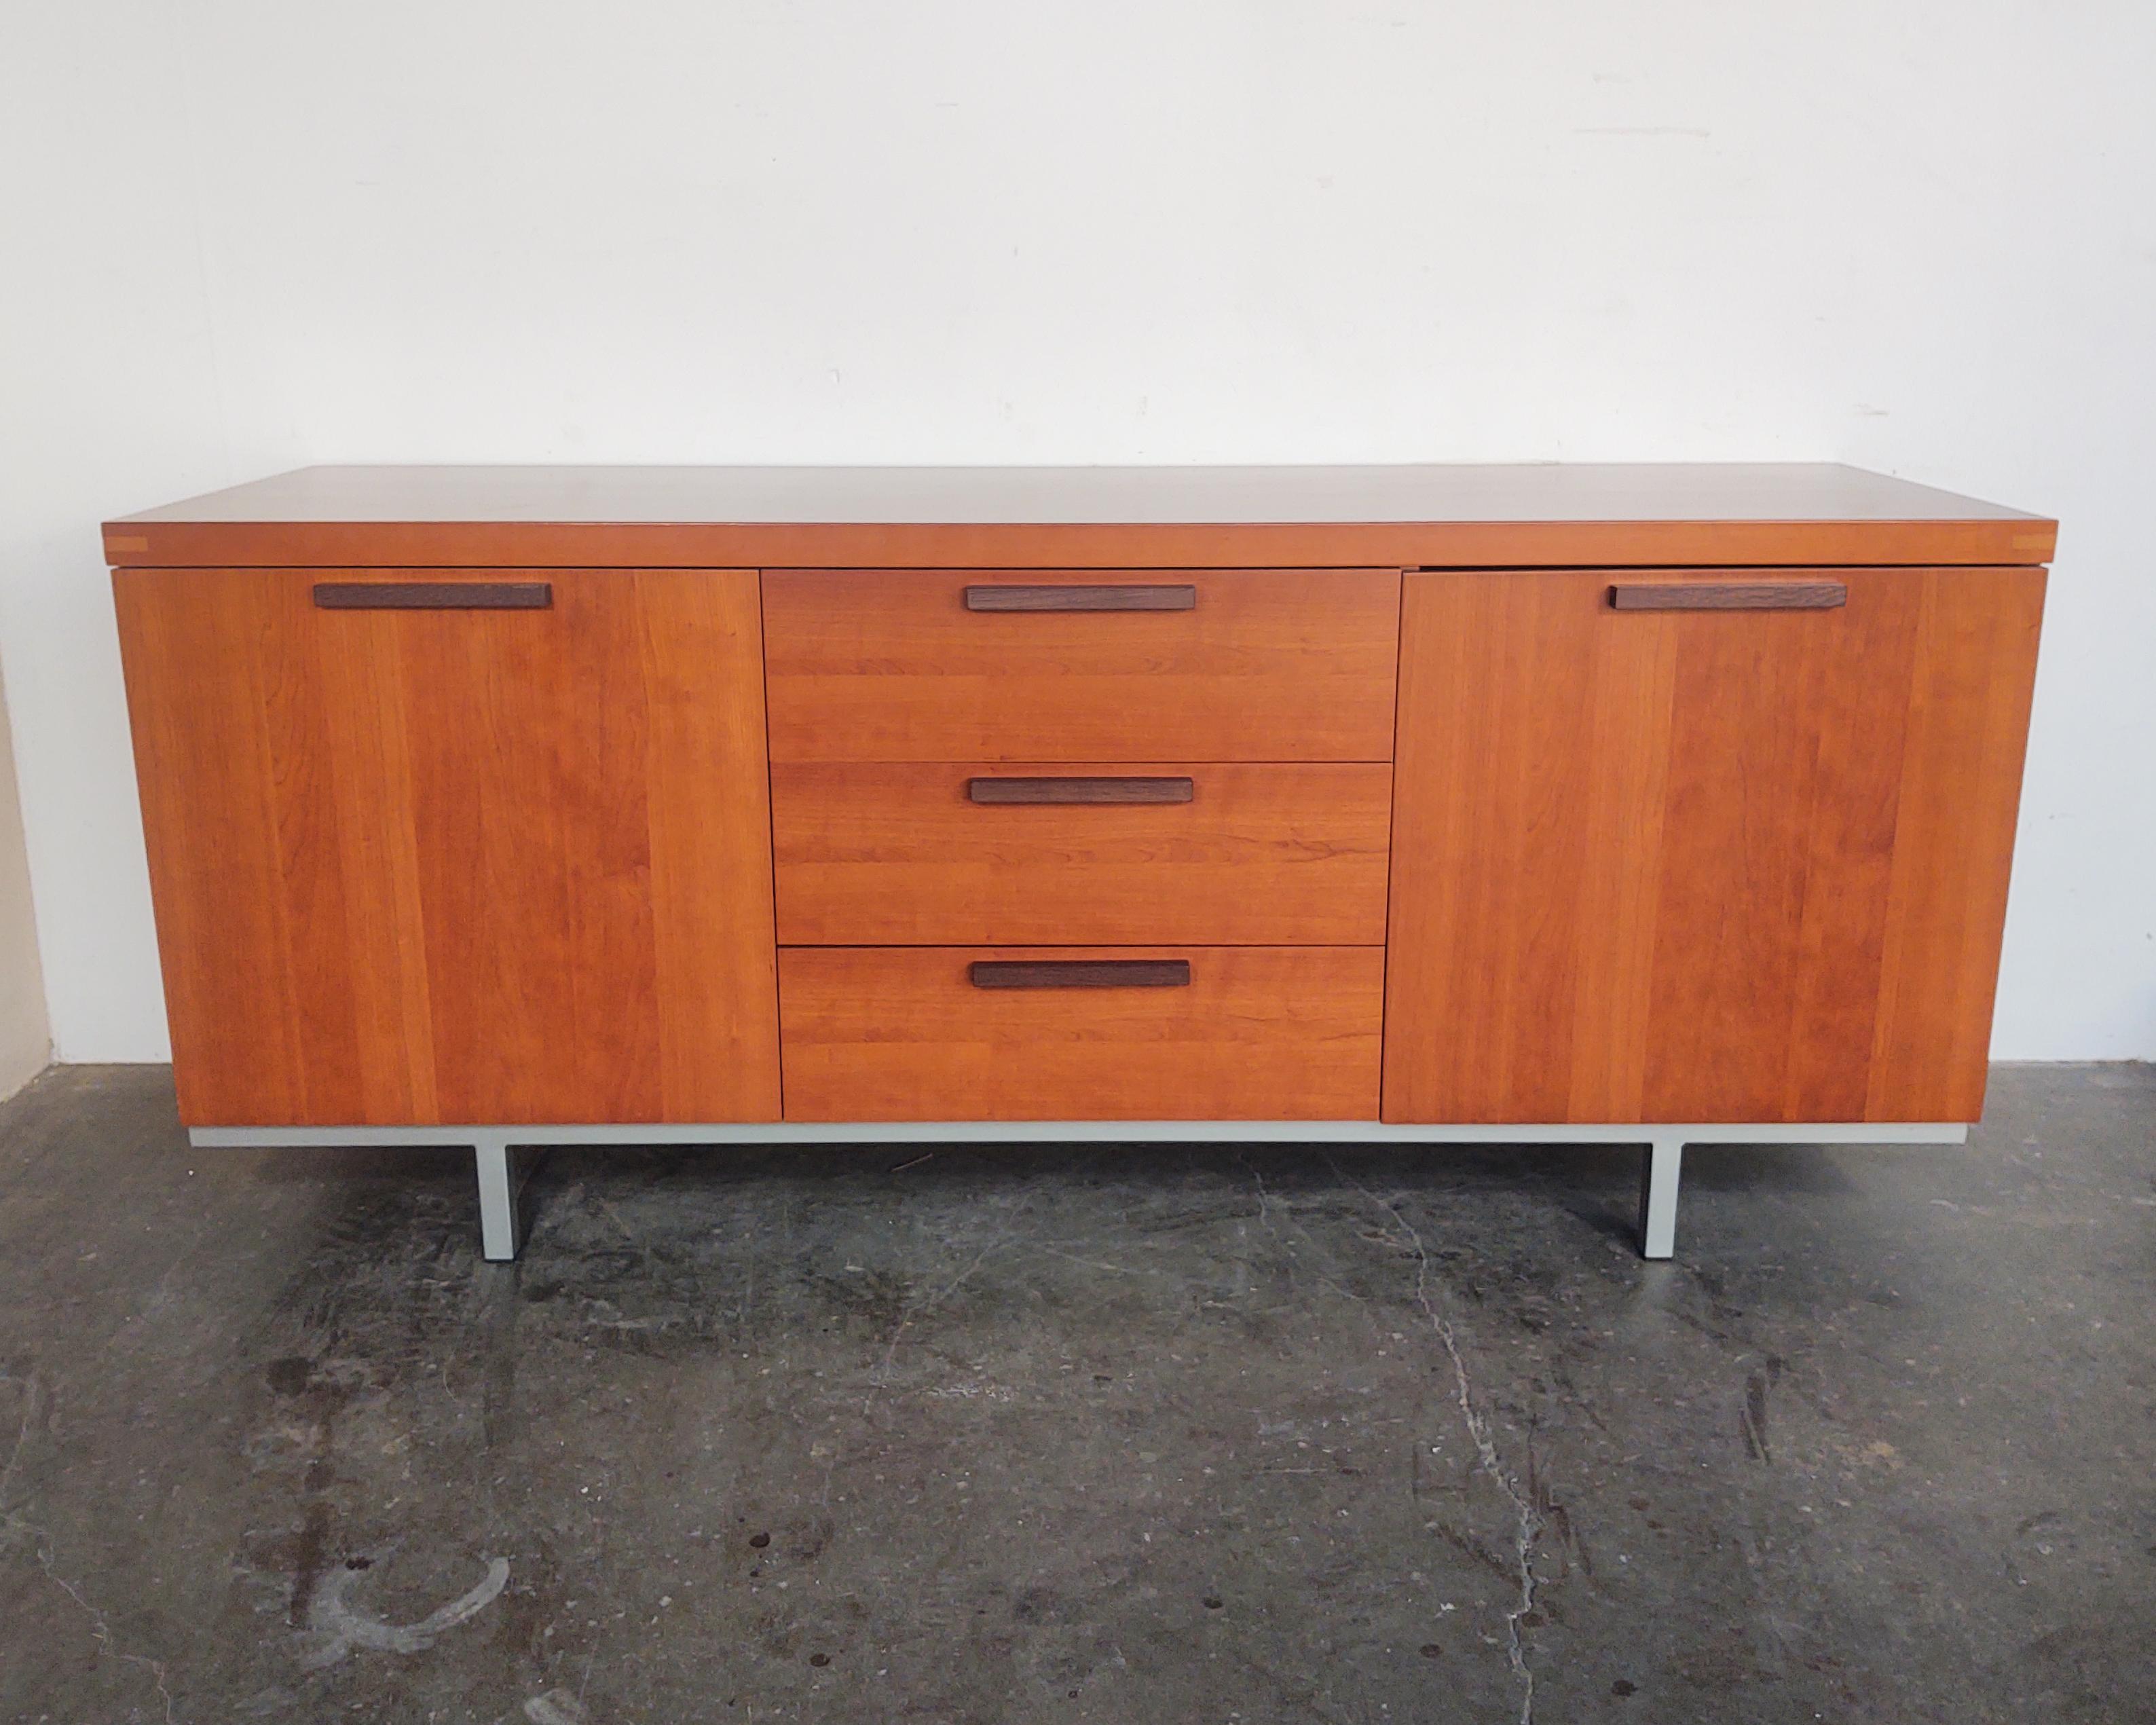 Cherry wood credenza by Calligaris, made in Italy. Minimal design with metal base and exposed top corner joinery. Three drawers down the center with solid oak ebony-stained wood pulls. Cabinets on each side feature adjustable glass shelf. Overall